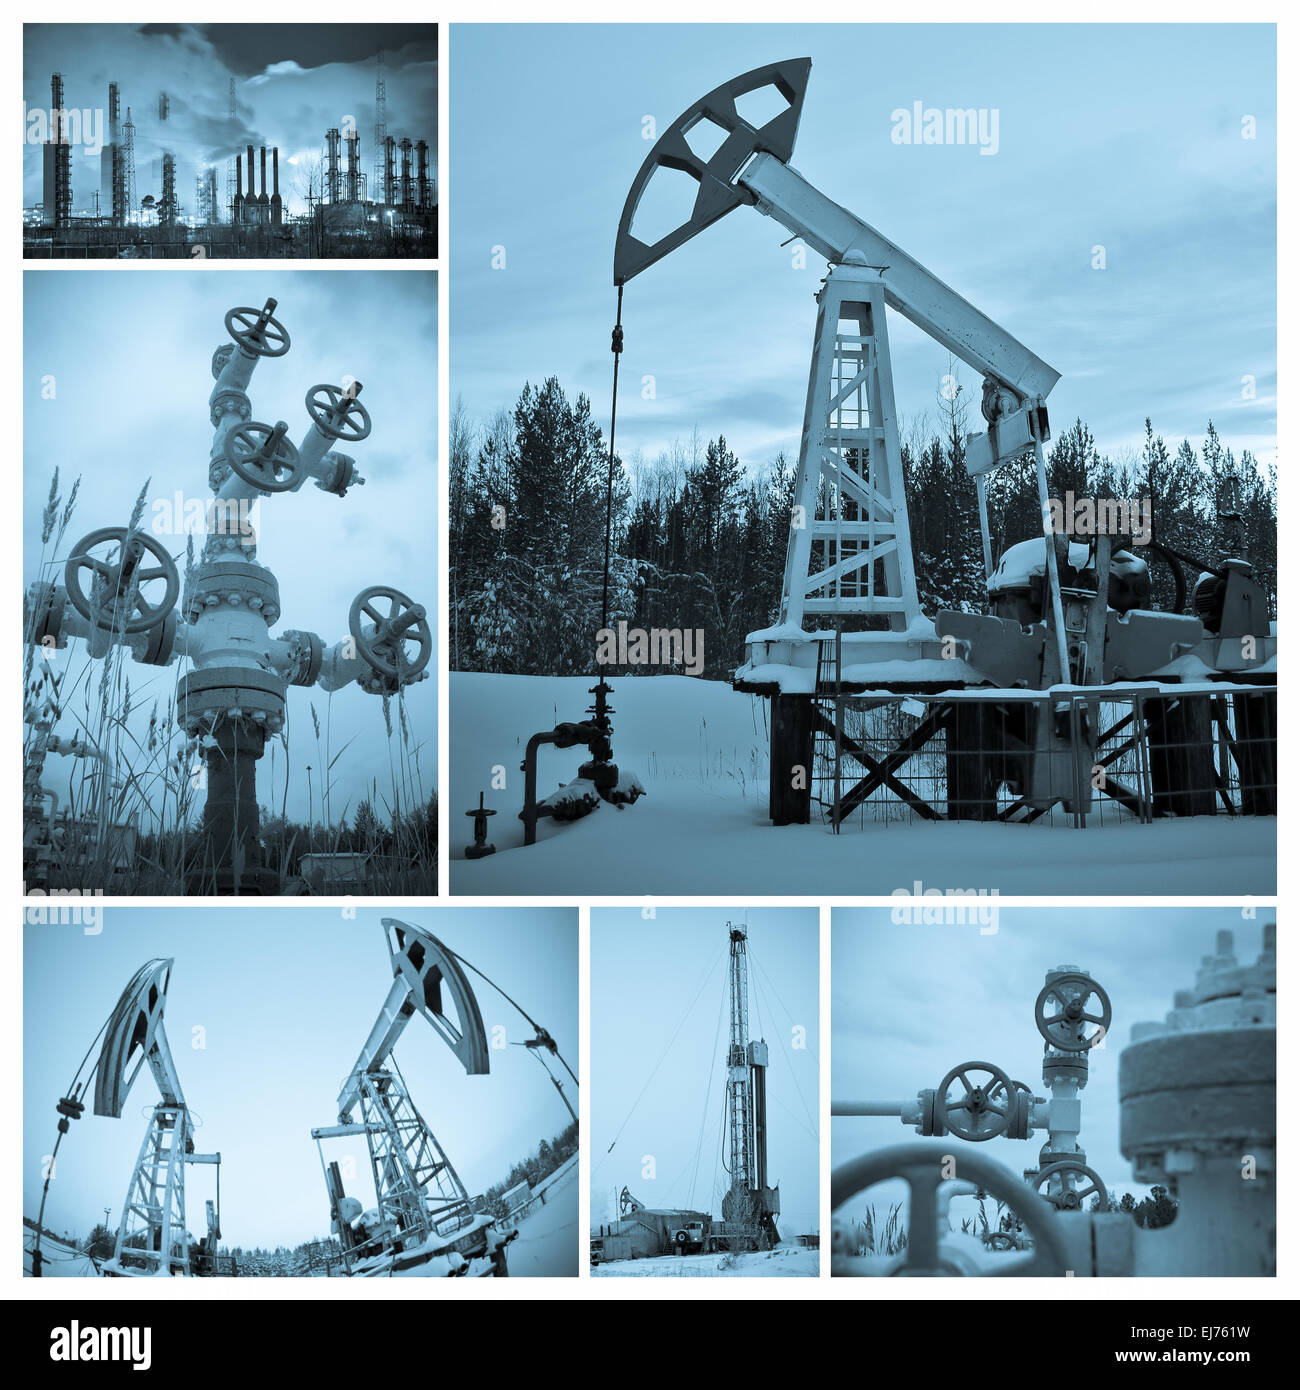 Oil industry. Oil extraction. Stock Photo